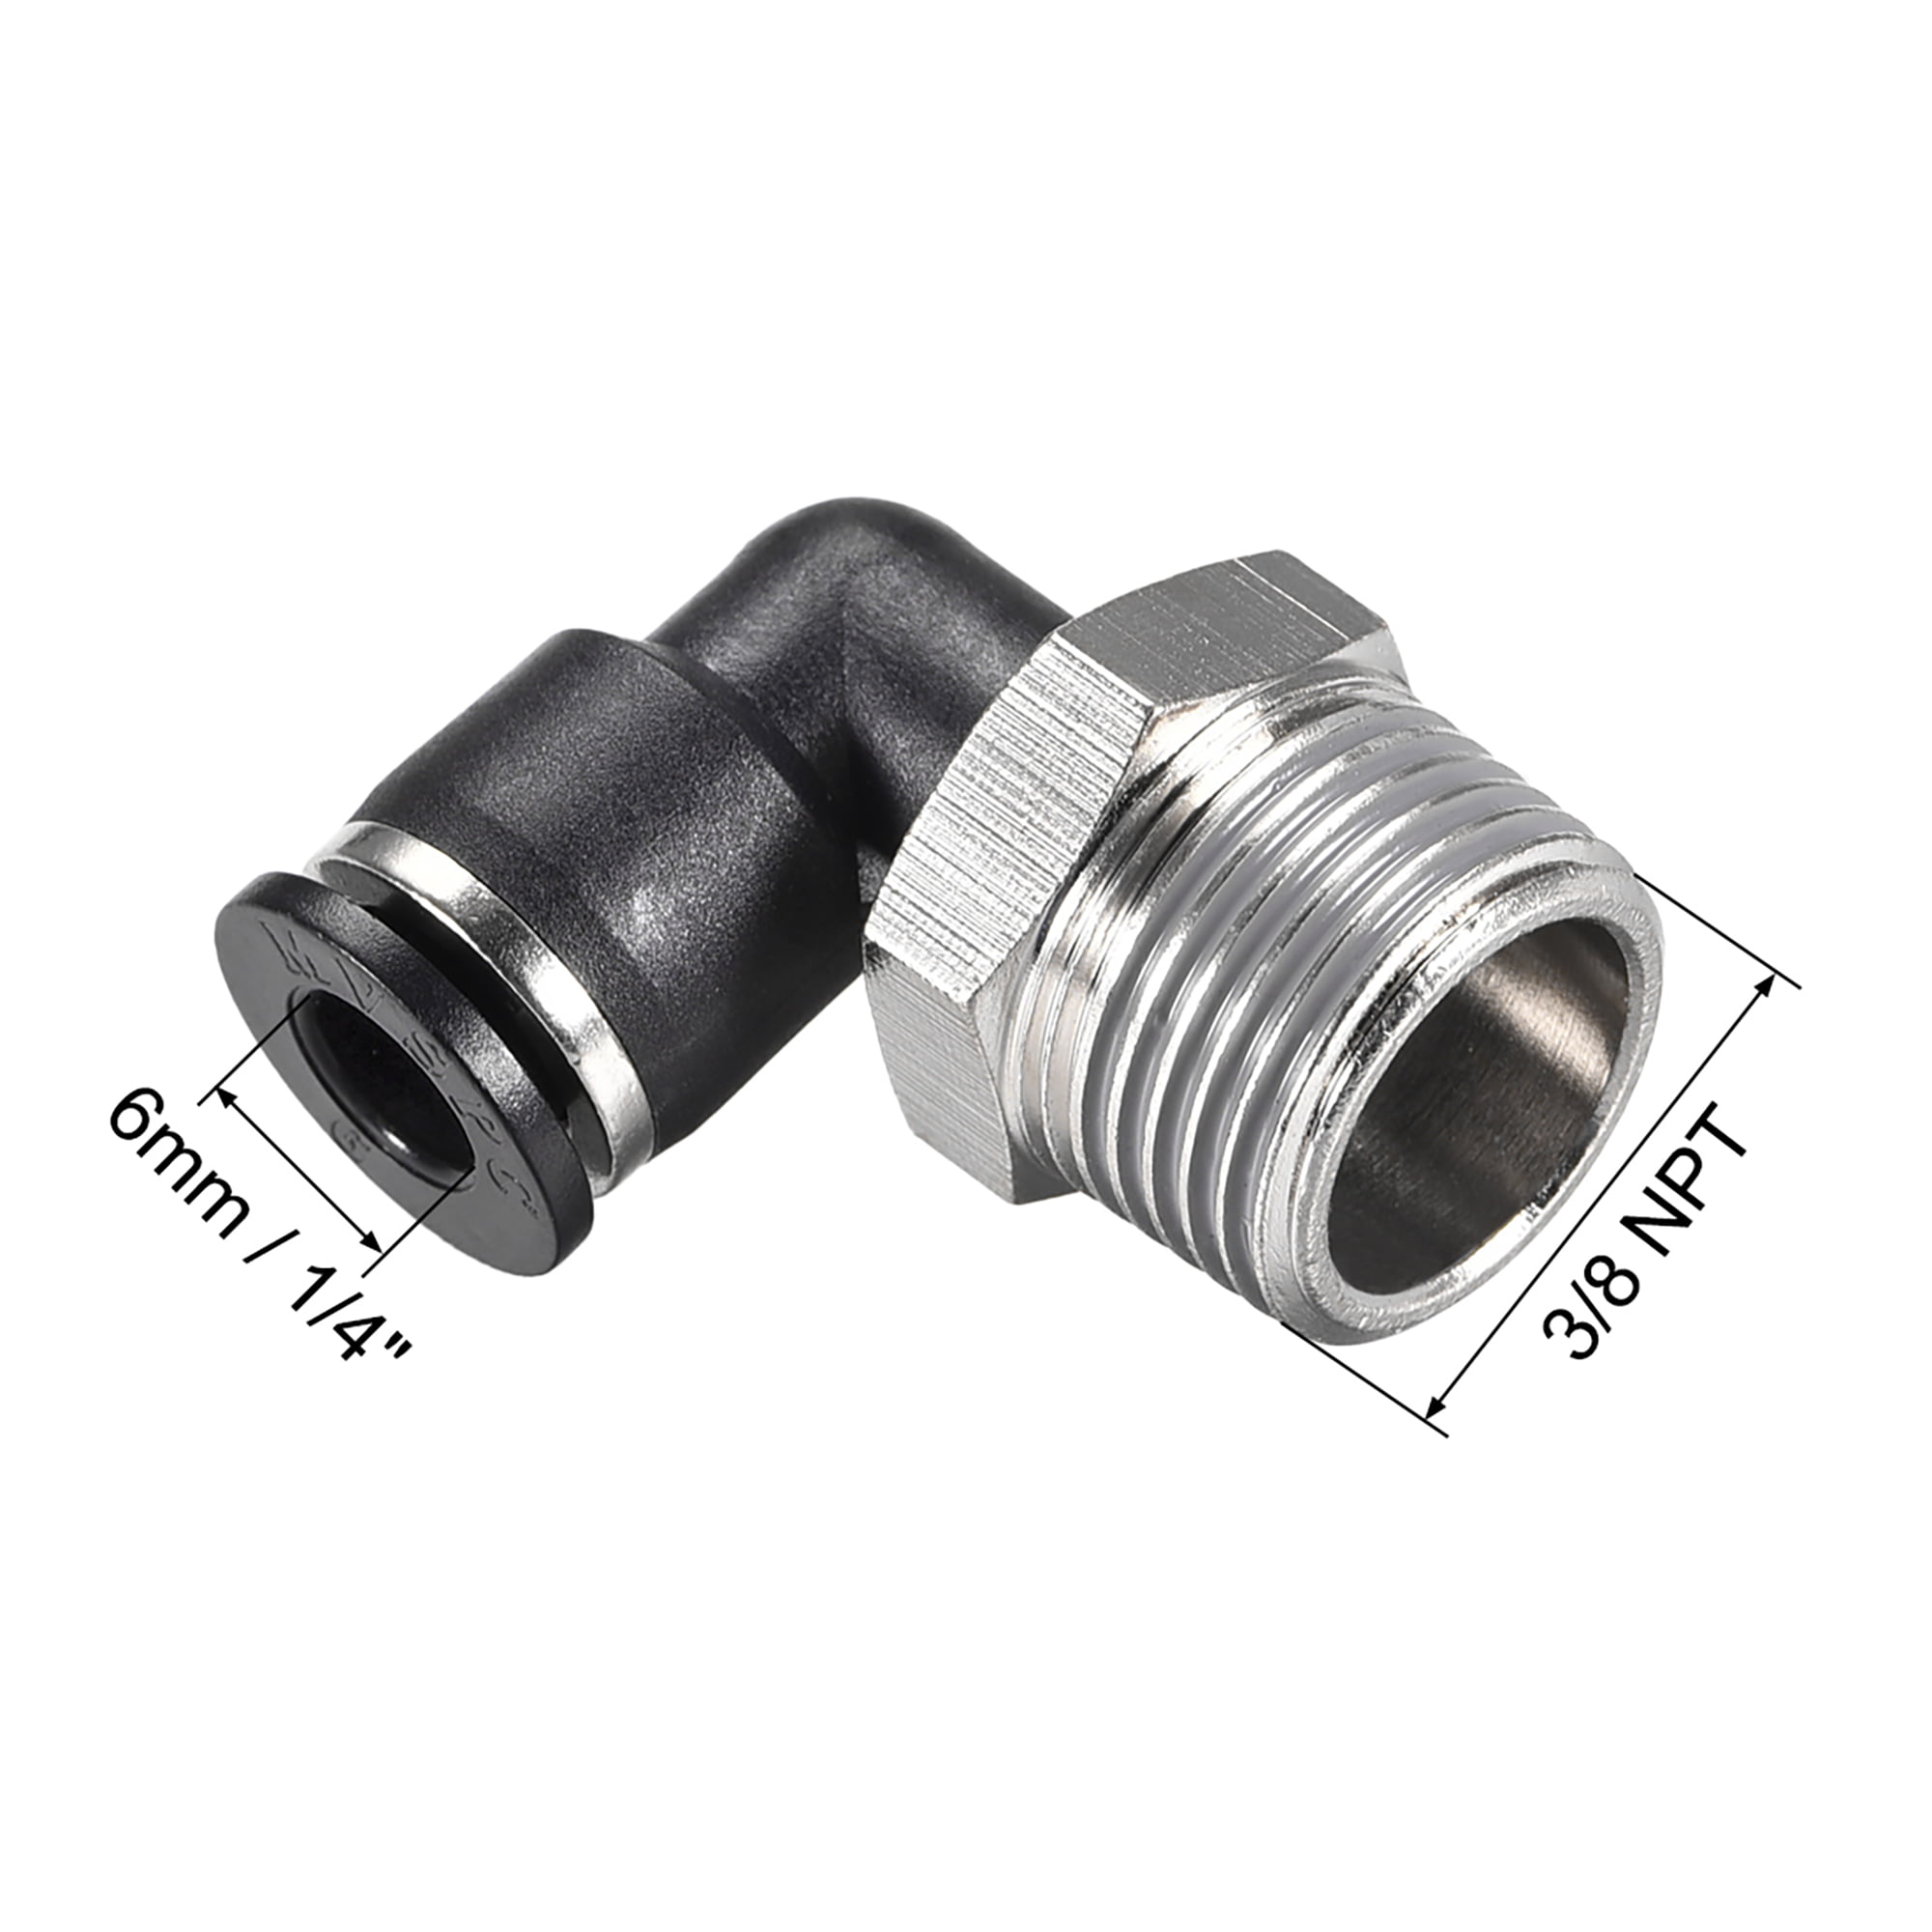 5 PCS 1/4" OD x 1/4" NPT  Swiveling Elbow Metal Push In to Connect Tube Fitting 